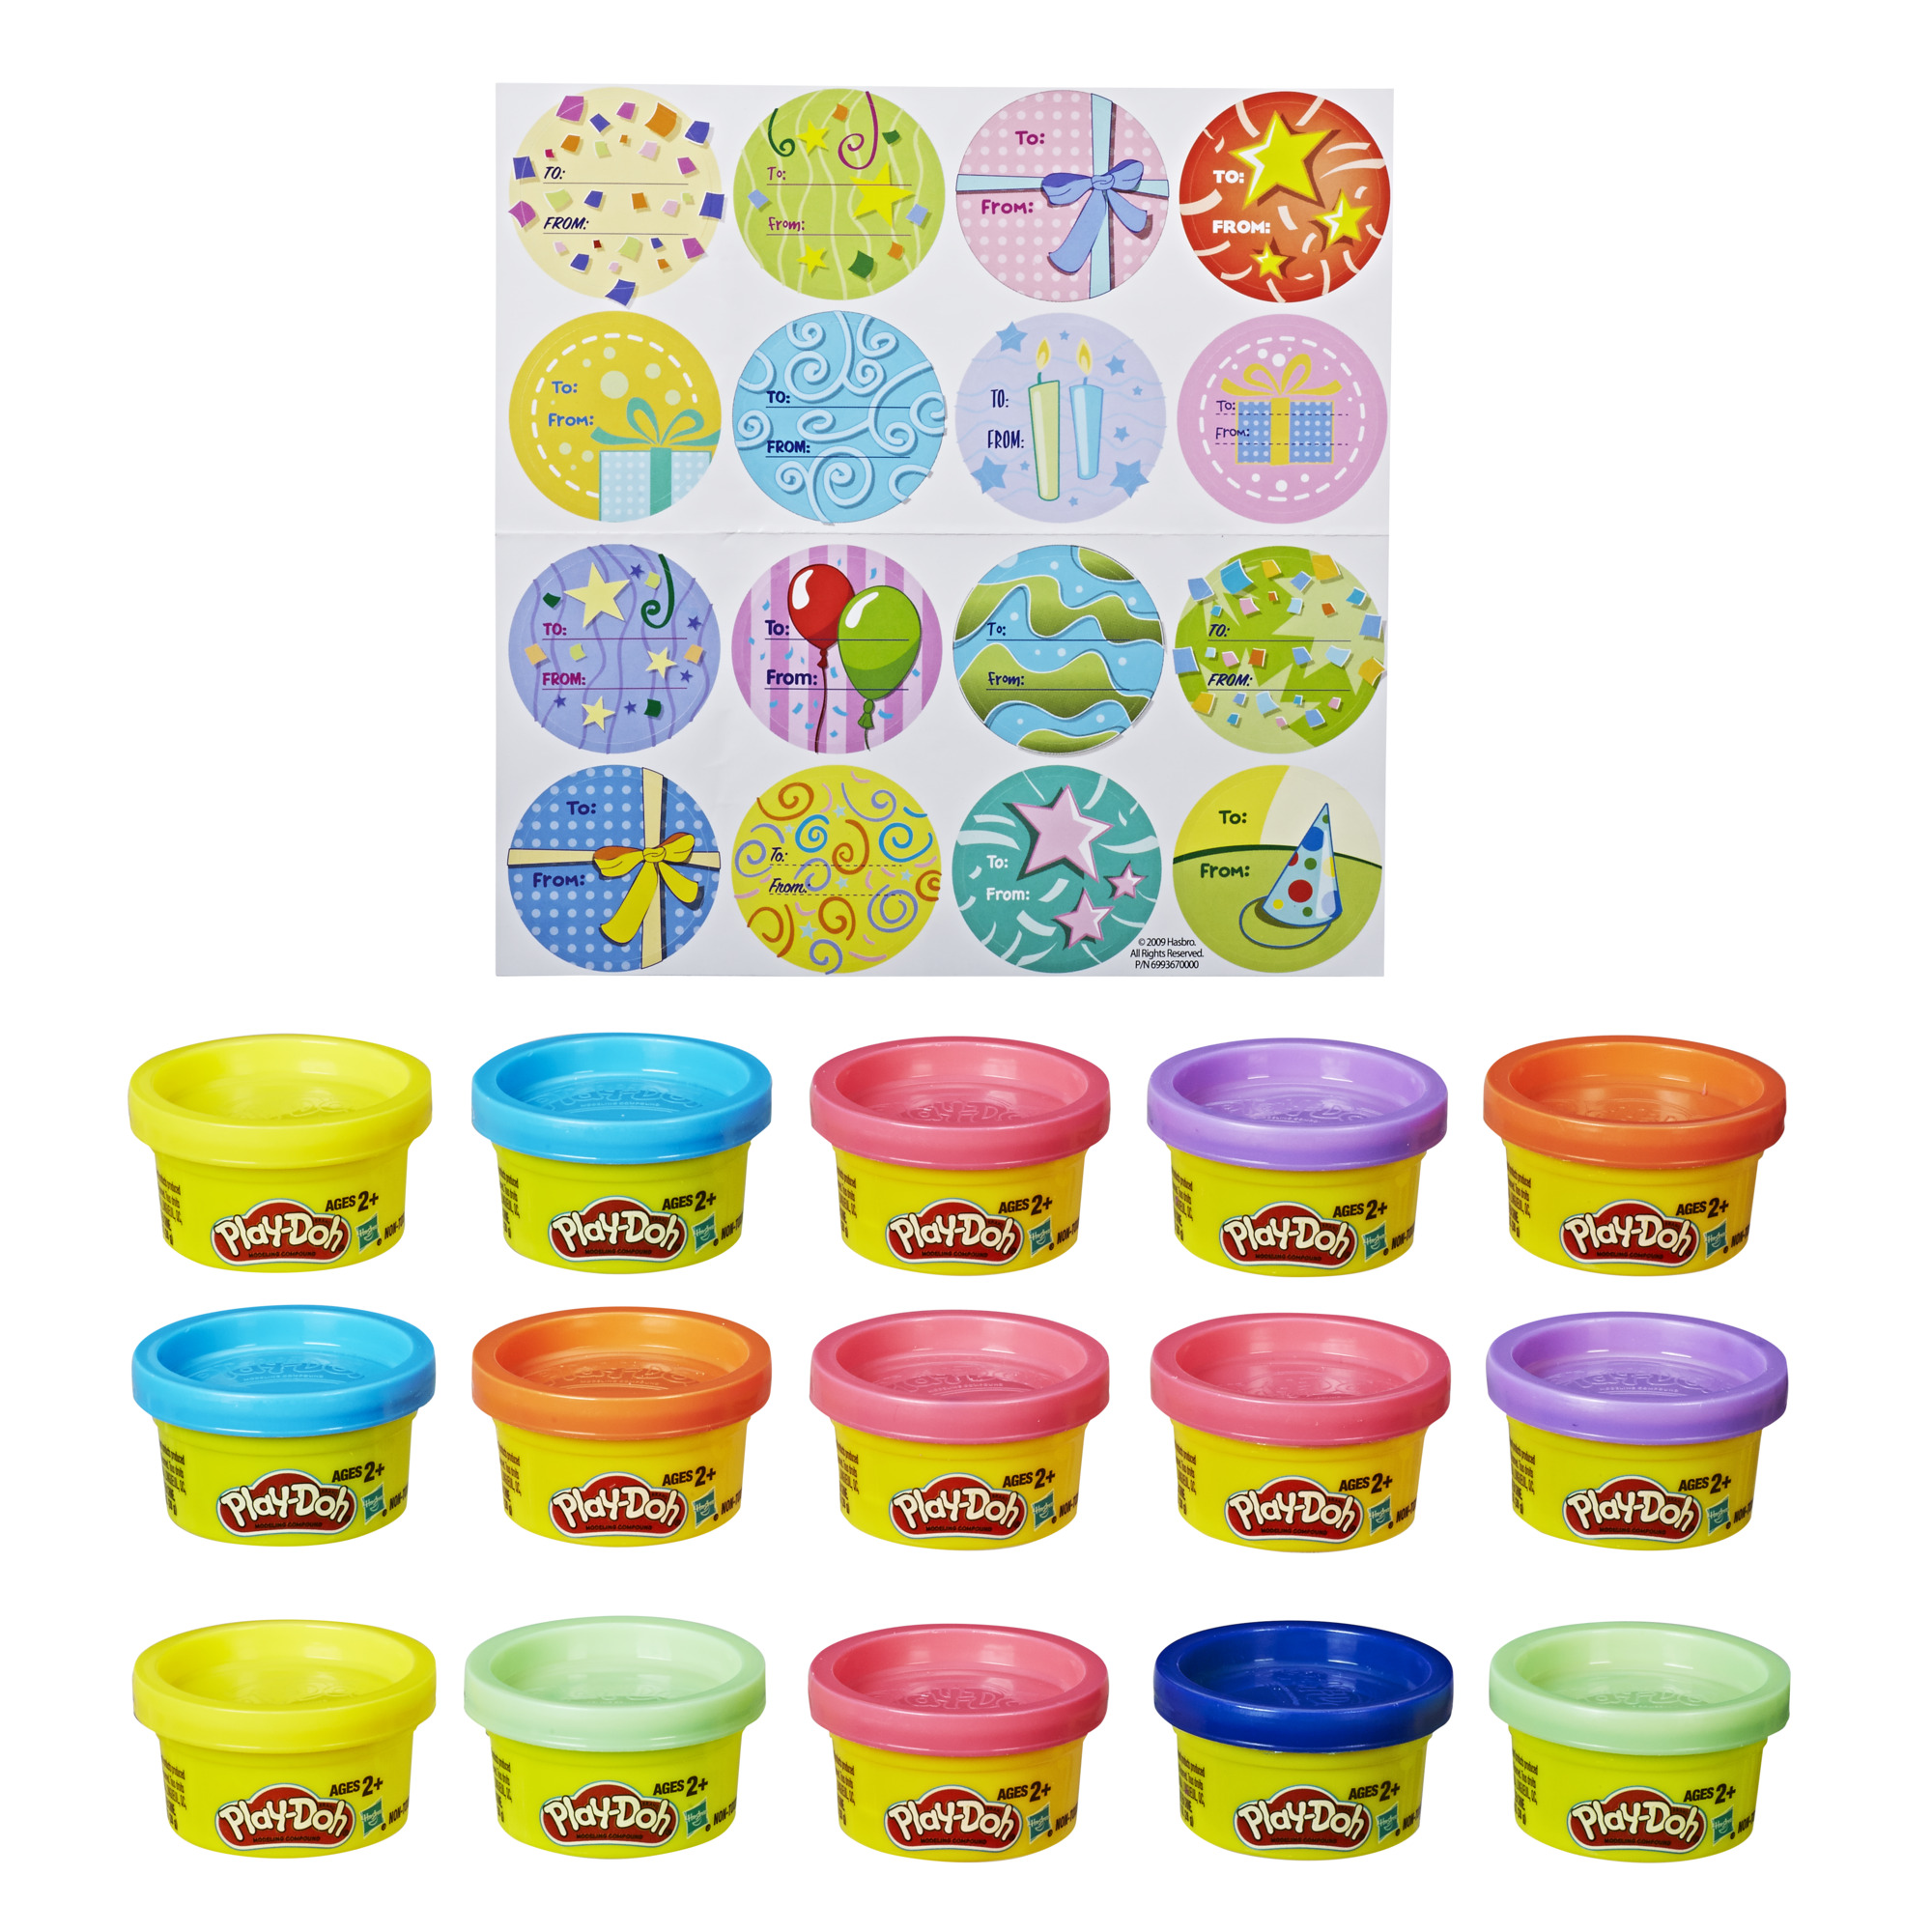 PLAY-DOH Party Bag - 15 one ounce cans of modeling compound, - image 1 of 6